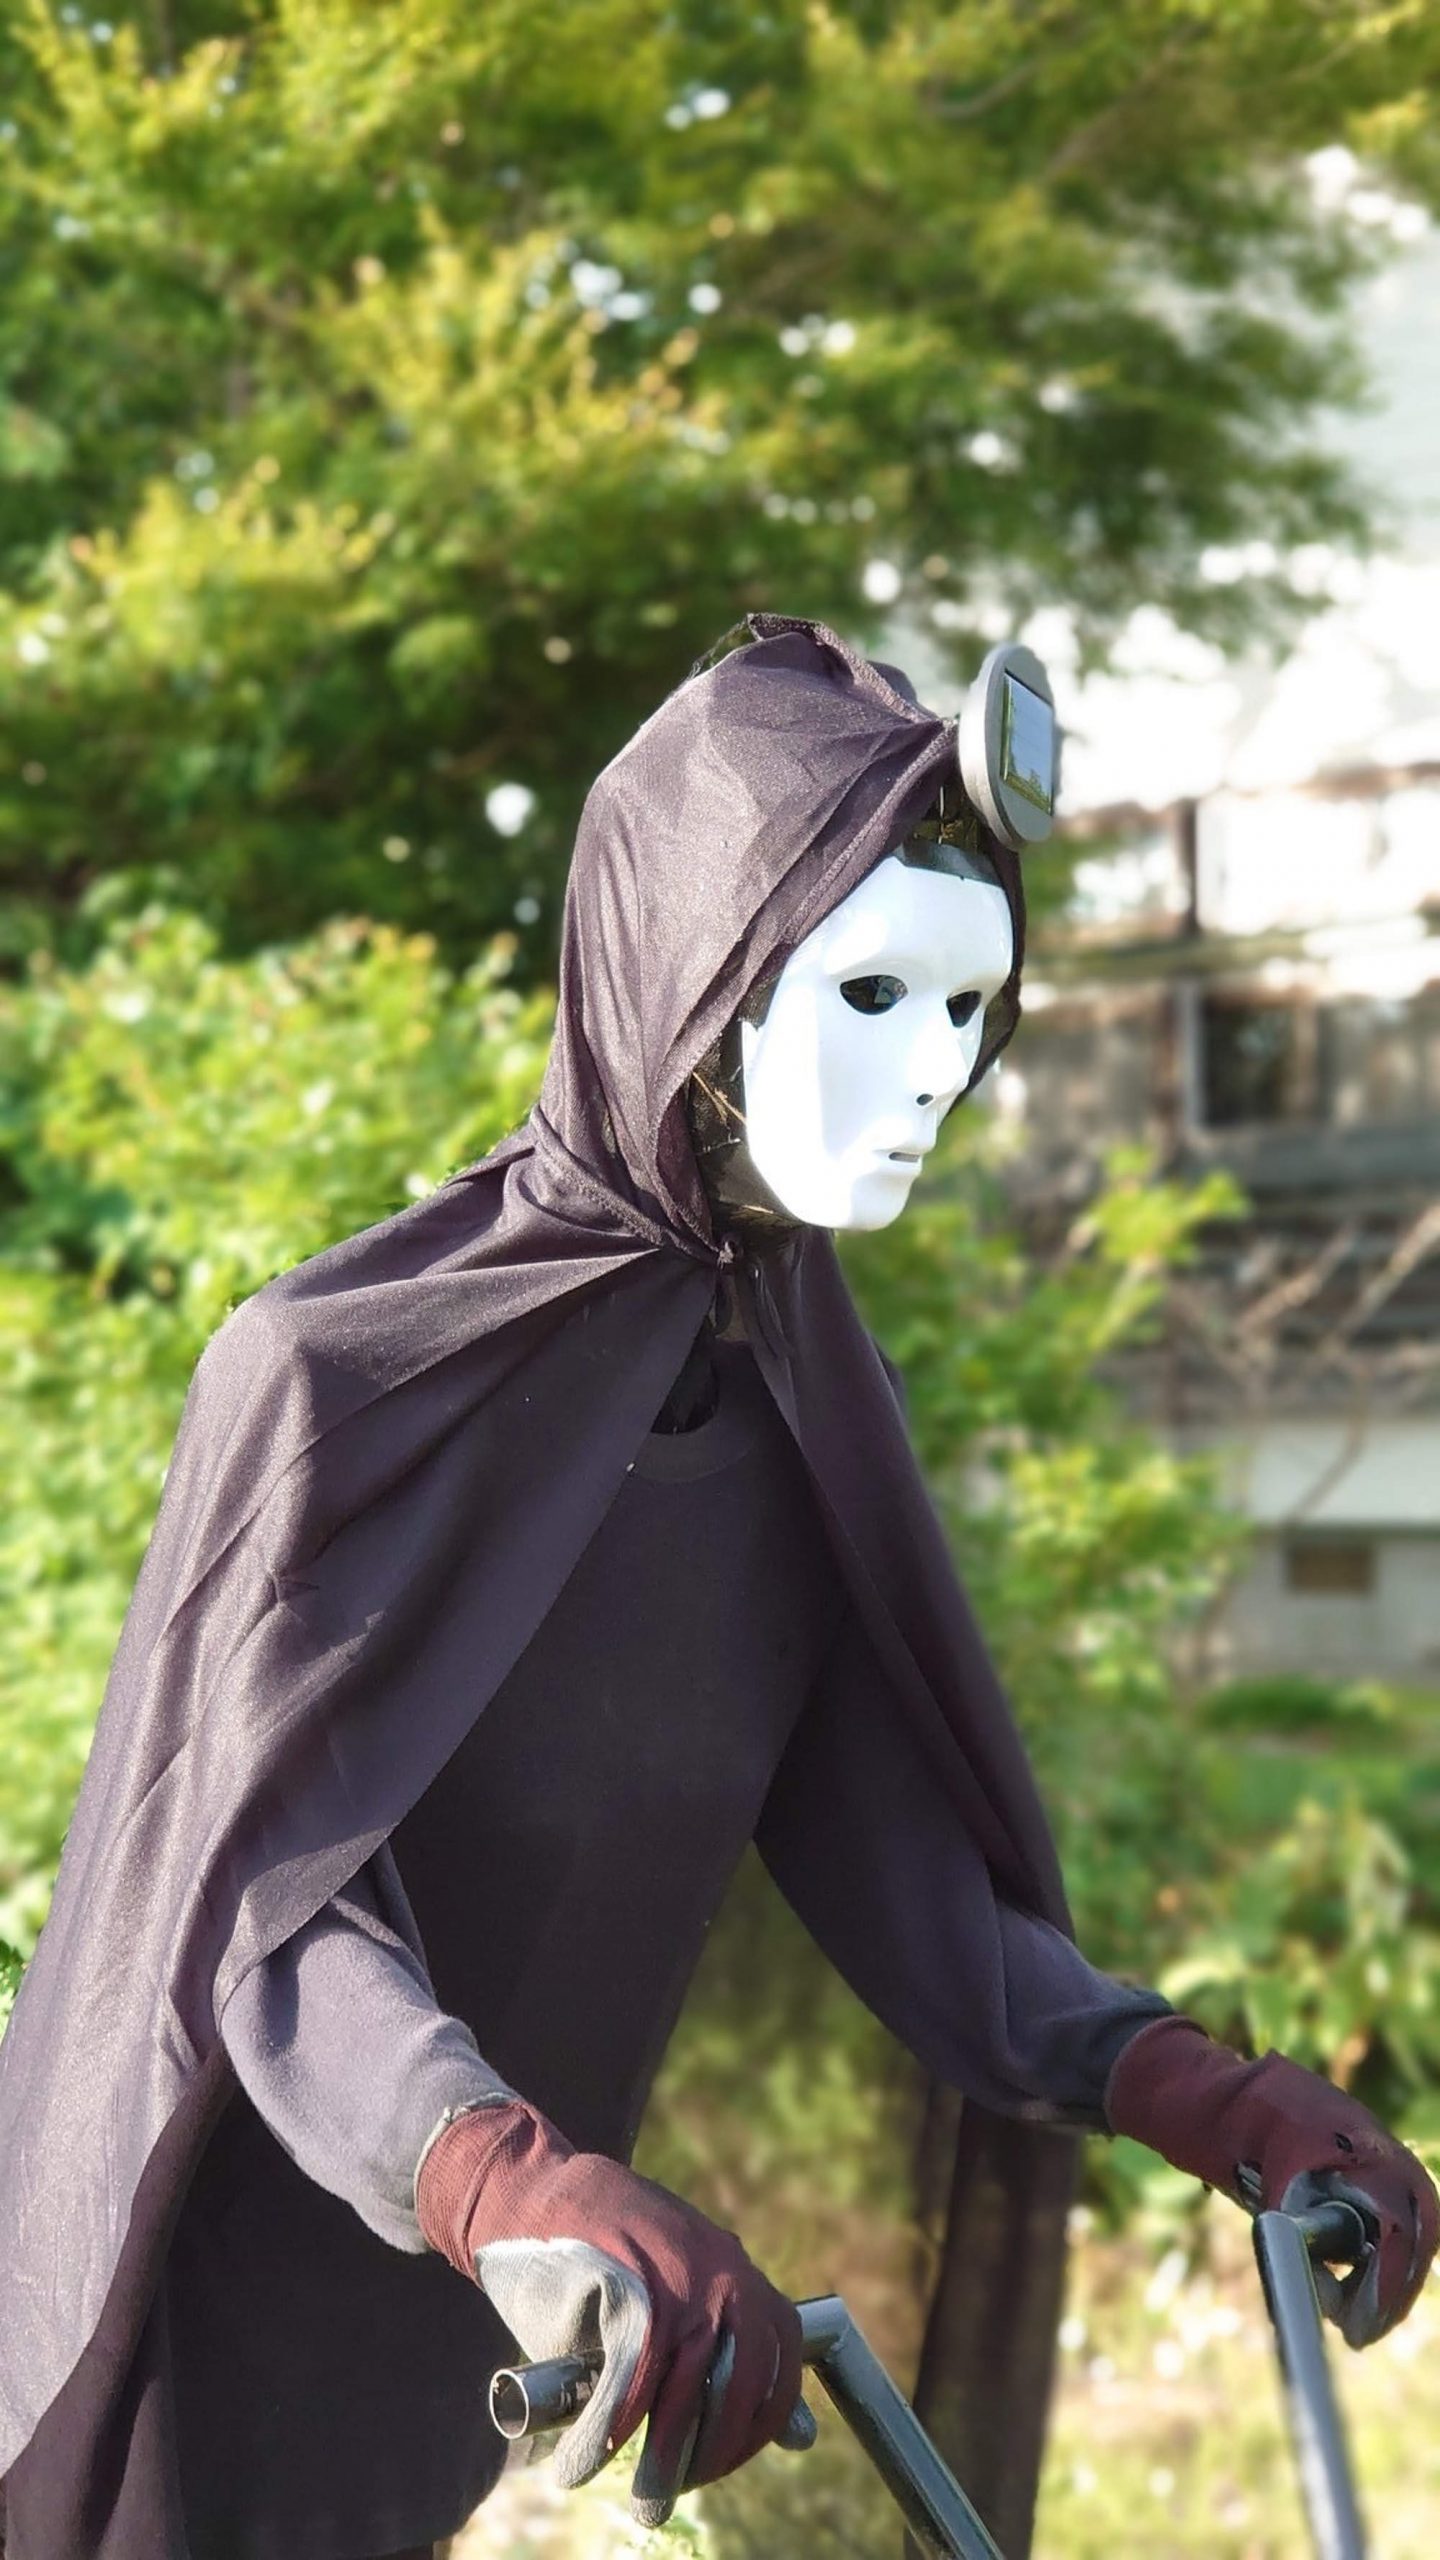 Read more about the article Floating Dementor Scarecrow Spooks Locals In Japan